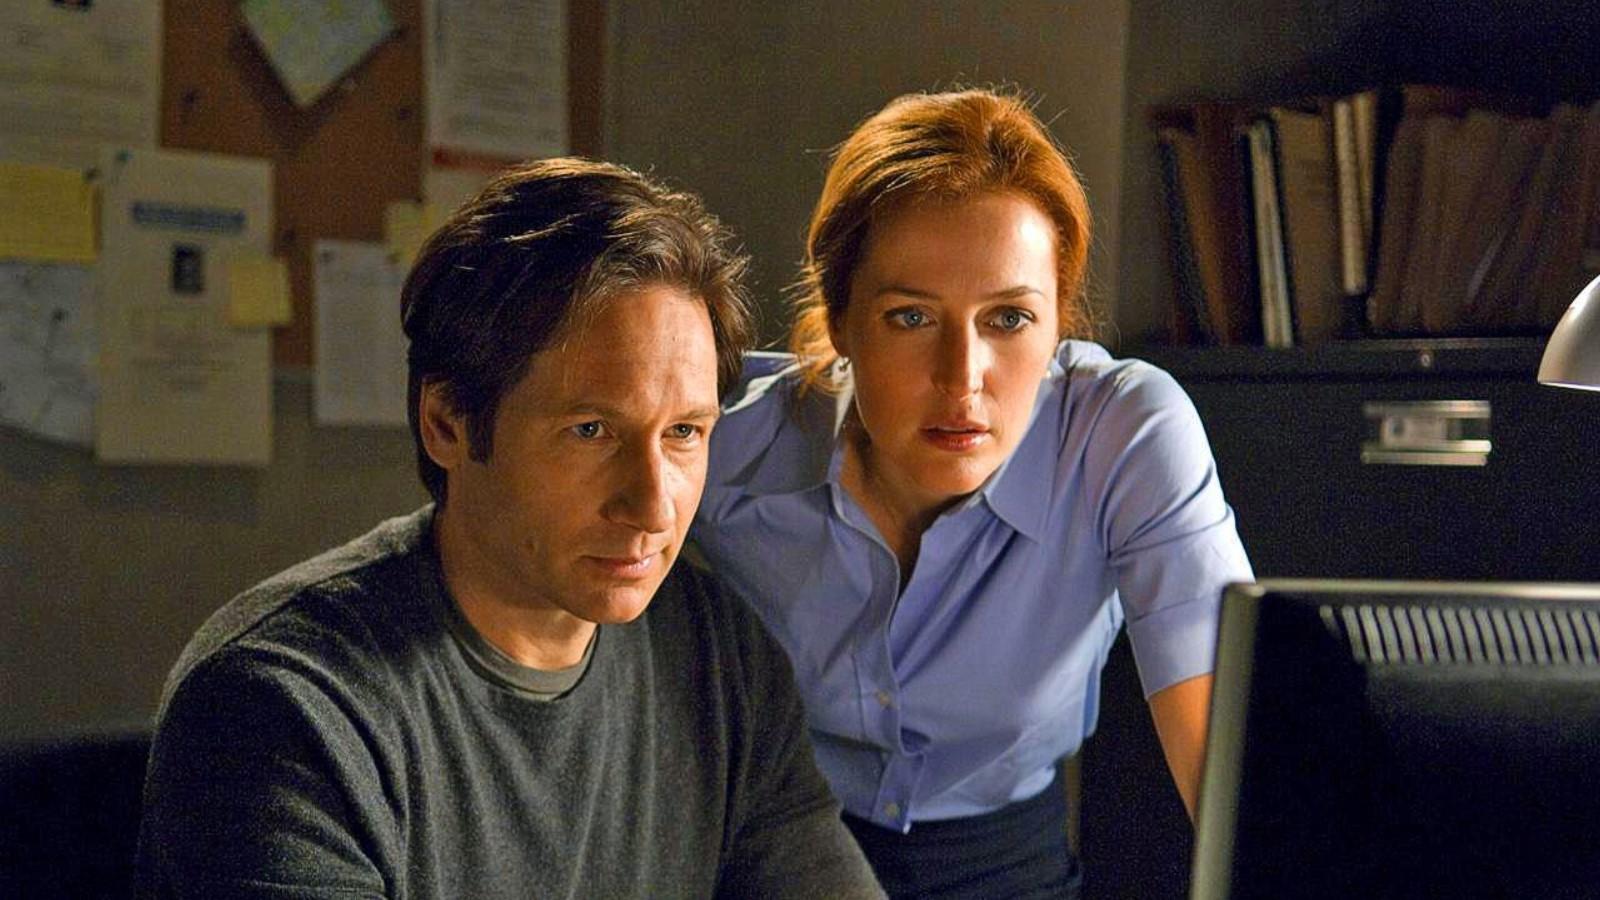 David Duchovny and Gillian Anderson as Fox and Scully in X-Files, looking at a computer